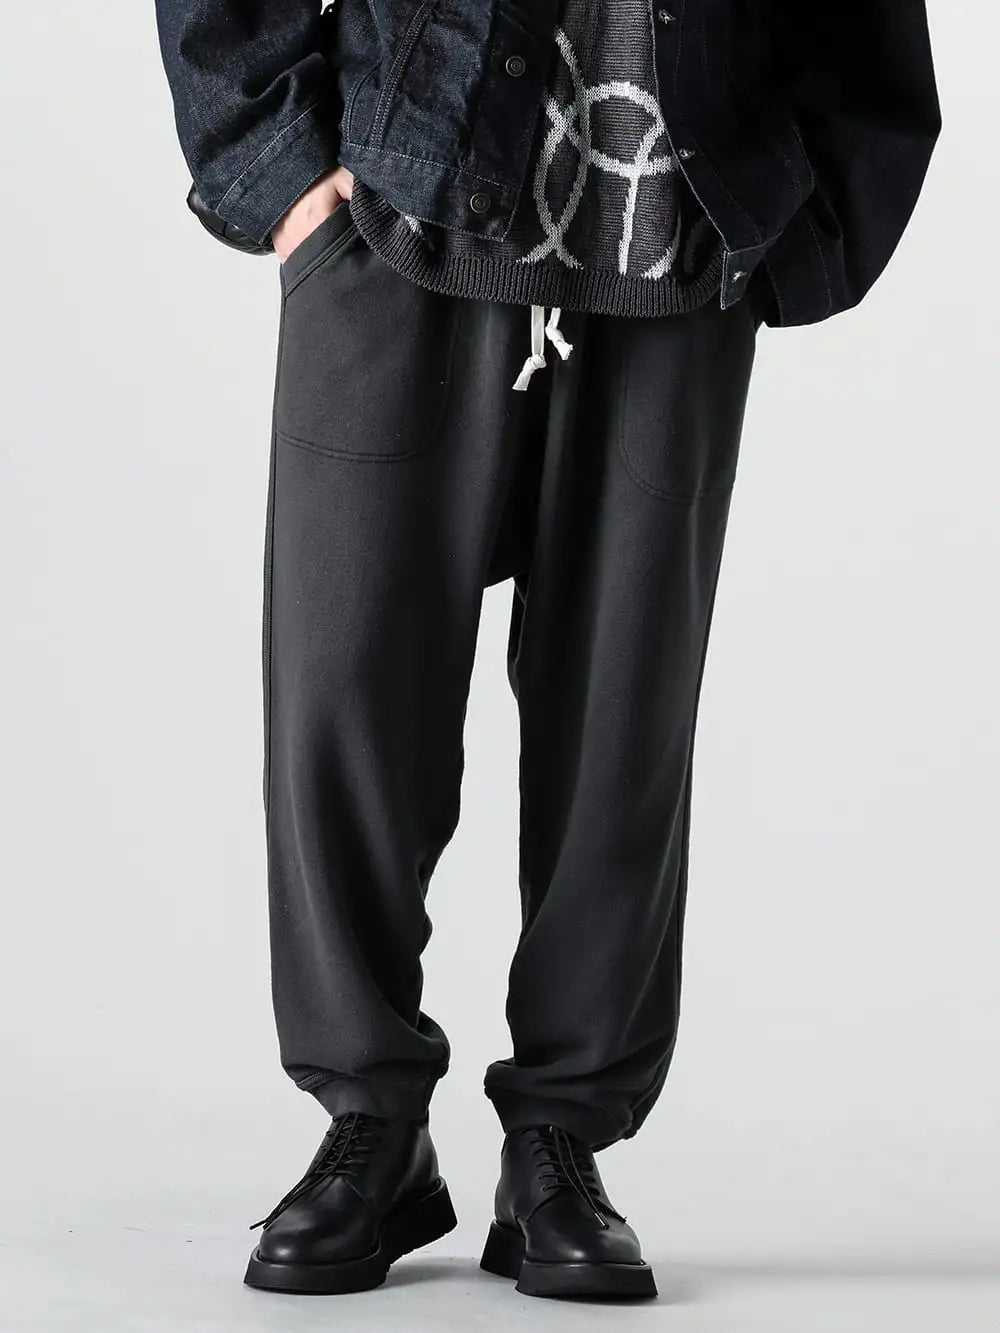 O PROJECT 24SS - Sweatpants Crafted with Exceptional Knitting Techniques - O17SWP1-BLACK - SWEATPANTS Loopwheel Sweat BLACK - RW-616 - Boston Gore 3-001